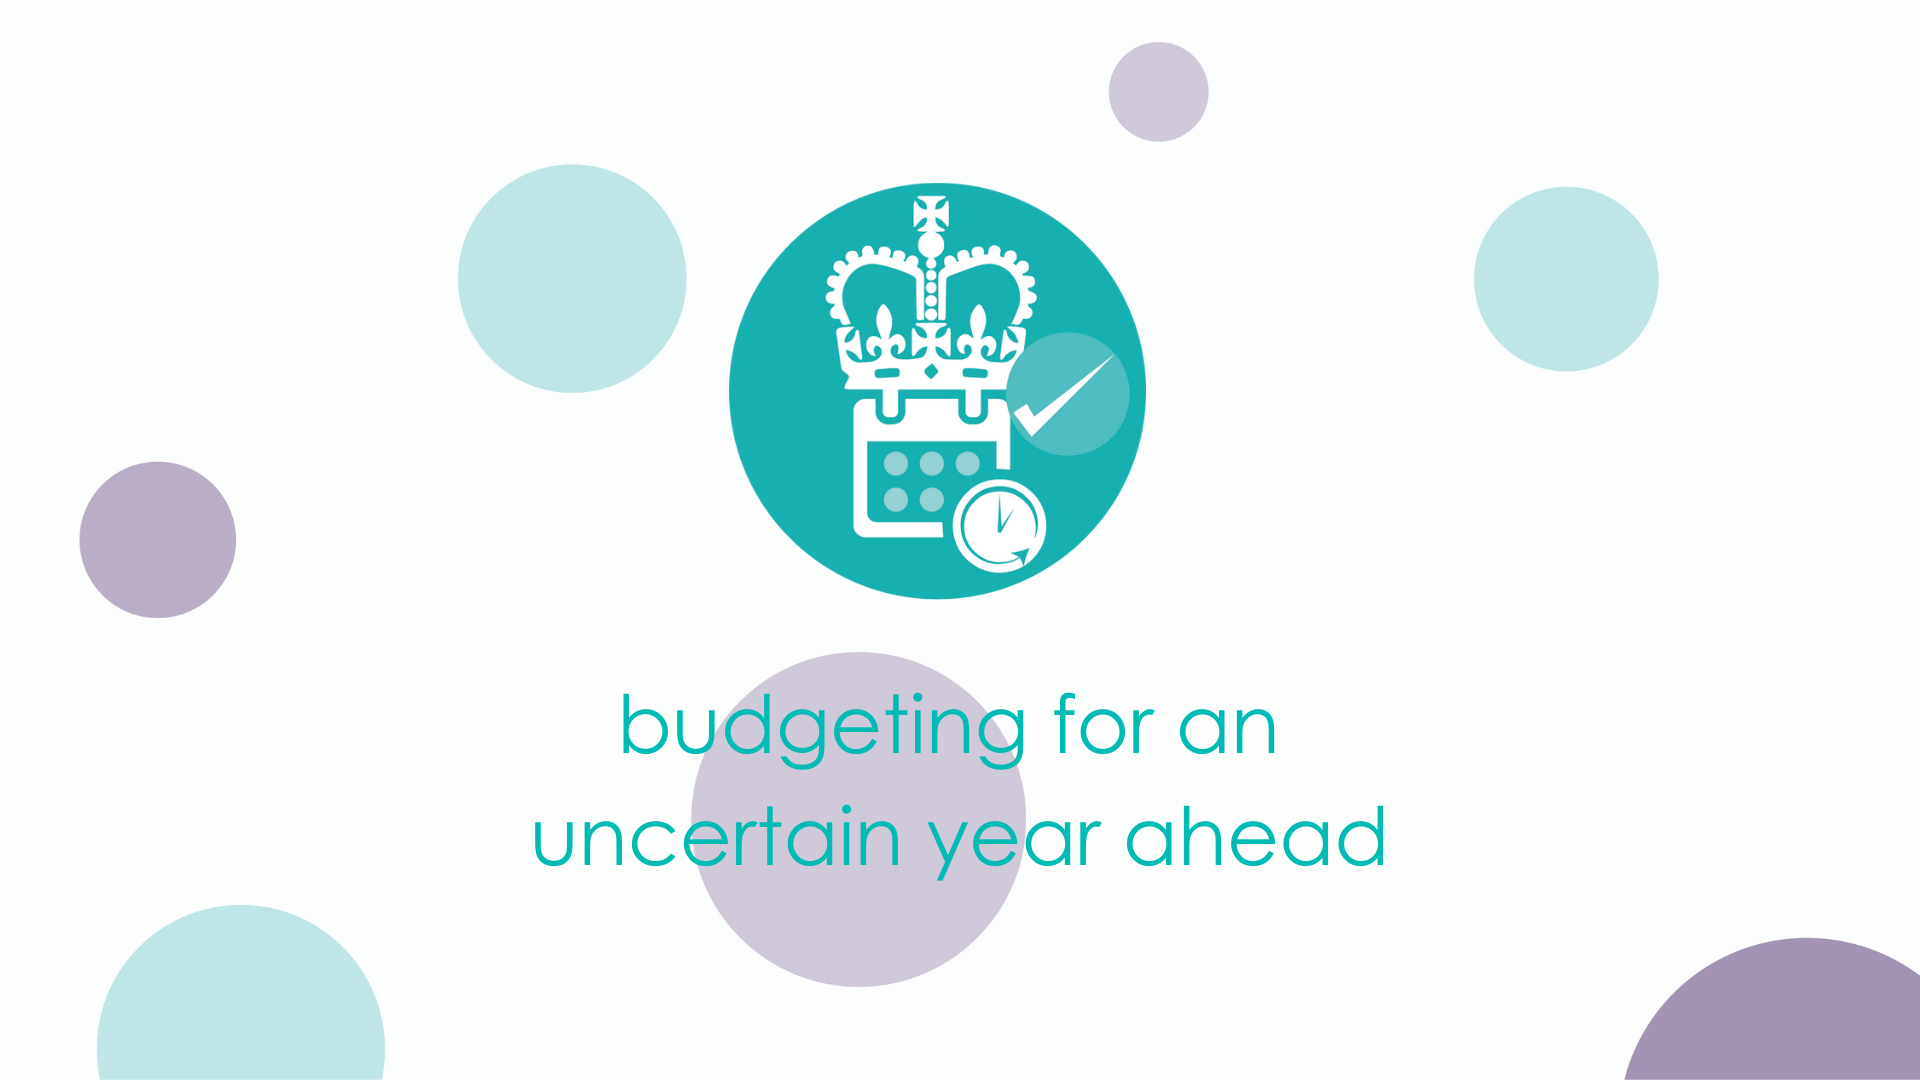 Budgeting for an uncertain year ahead